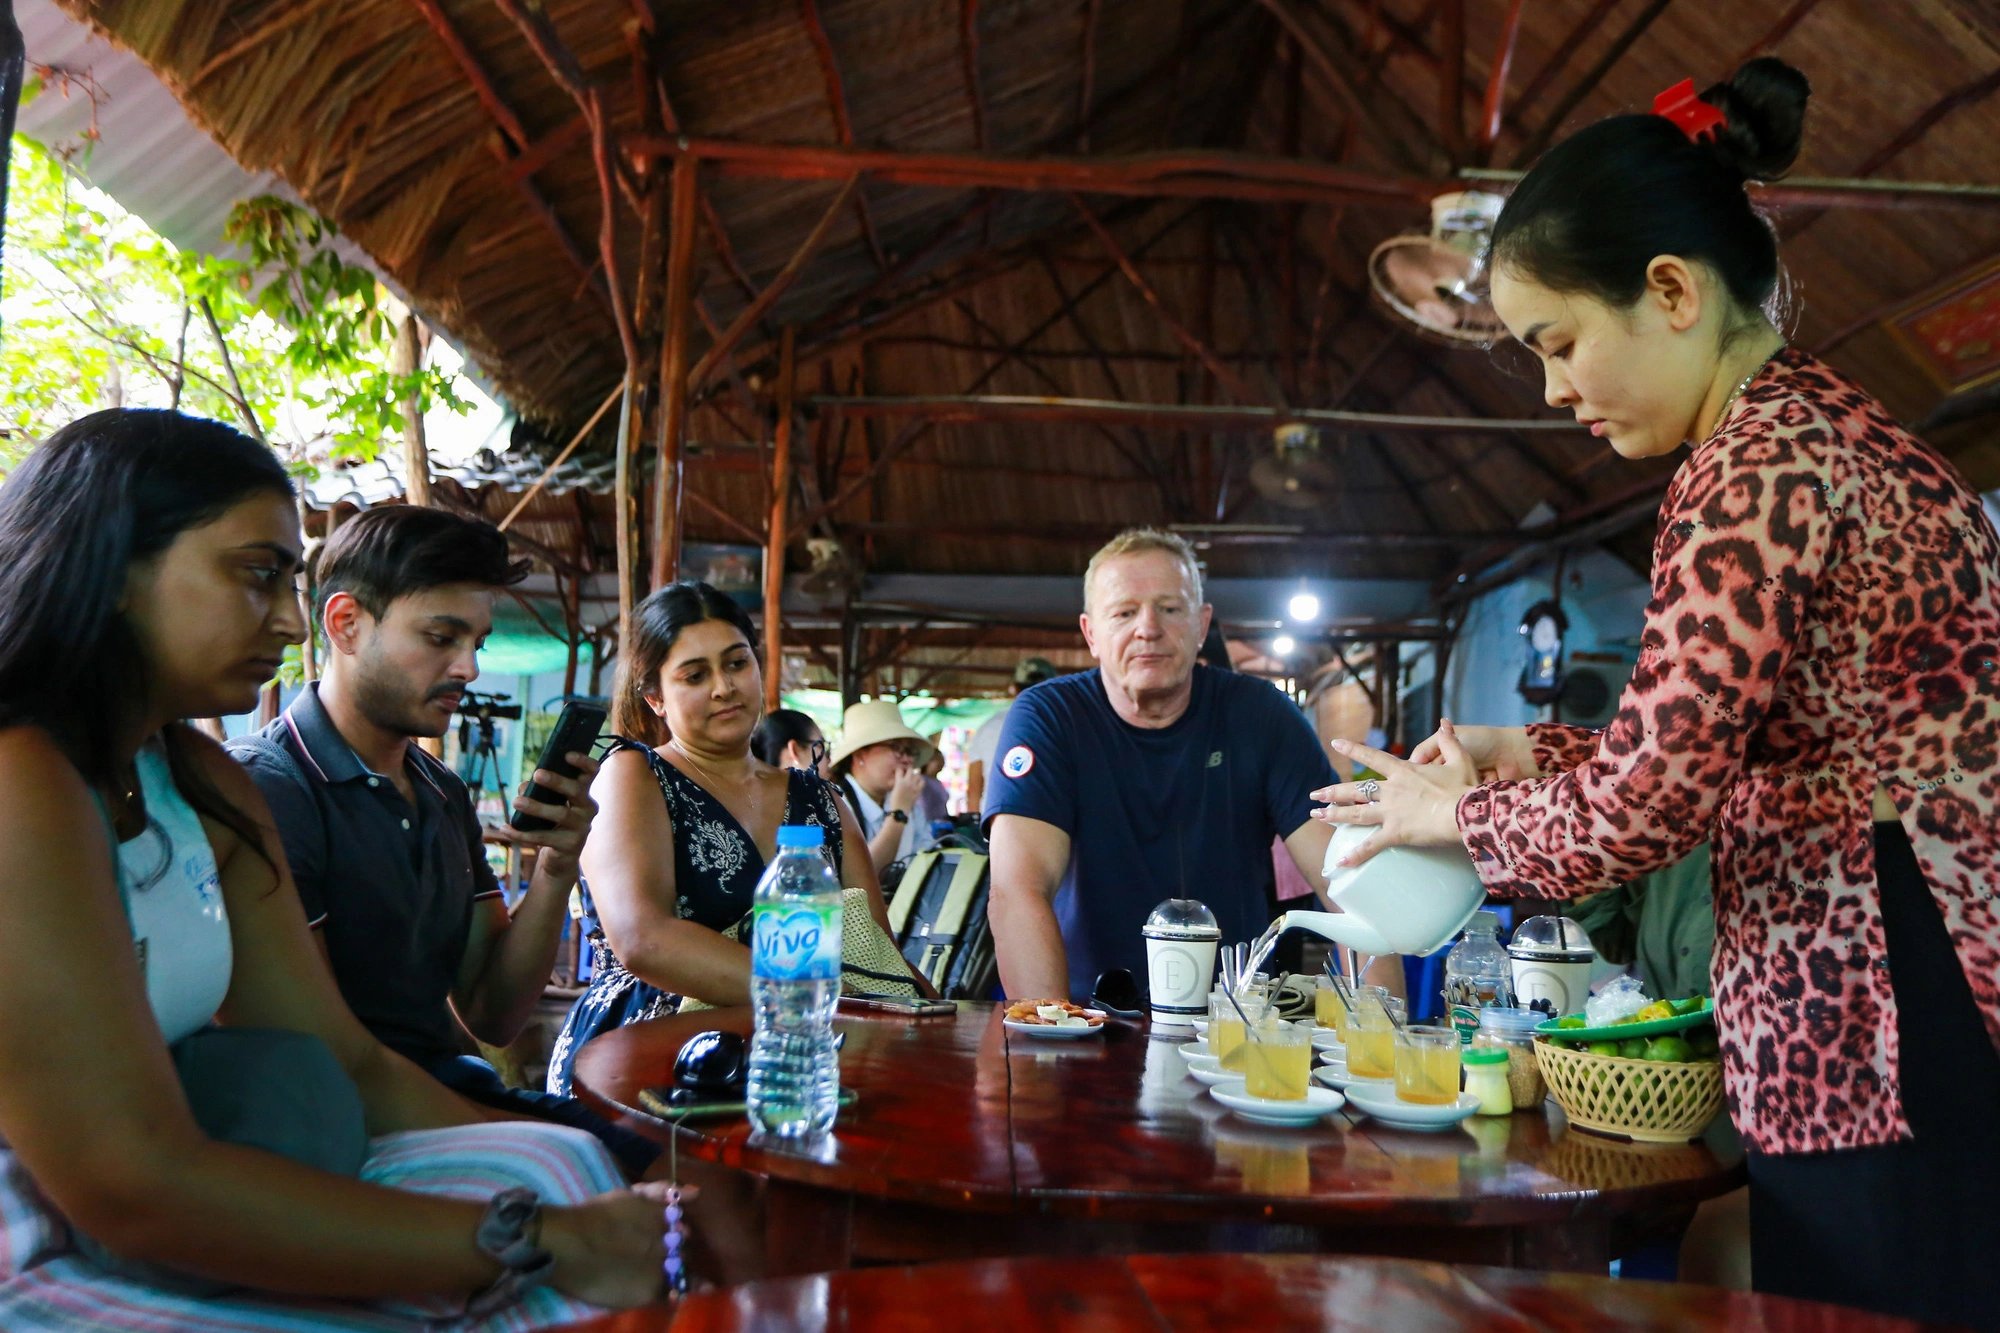 Foreign travelers are seen waiting to enjoy tea with honey offered by a woman at a beekeeping farm on Thoi Son Isle, located on the Tien River in Tien Giang Province, southern Vietnam. Photo: Phuong Quyen / Tuoi Tre